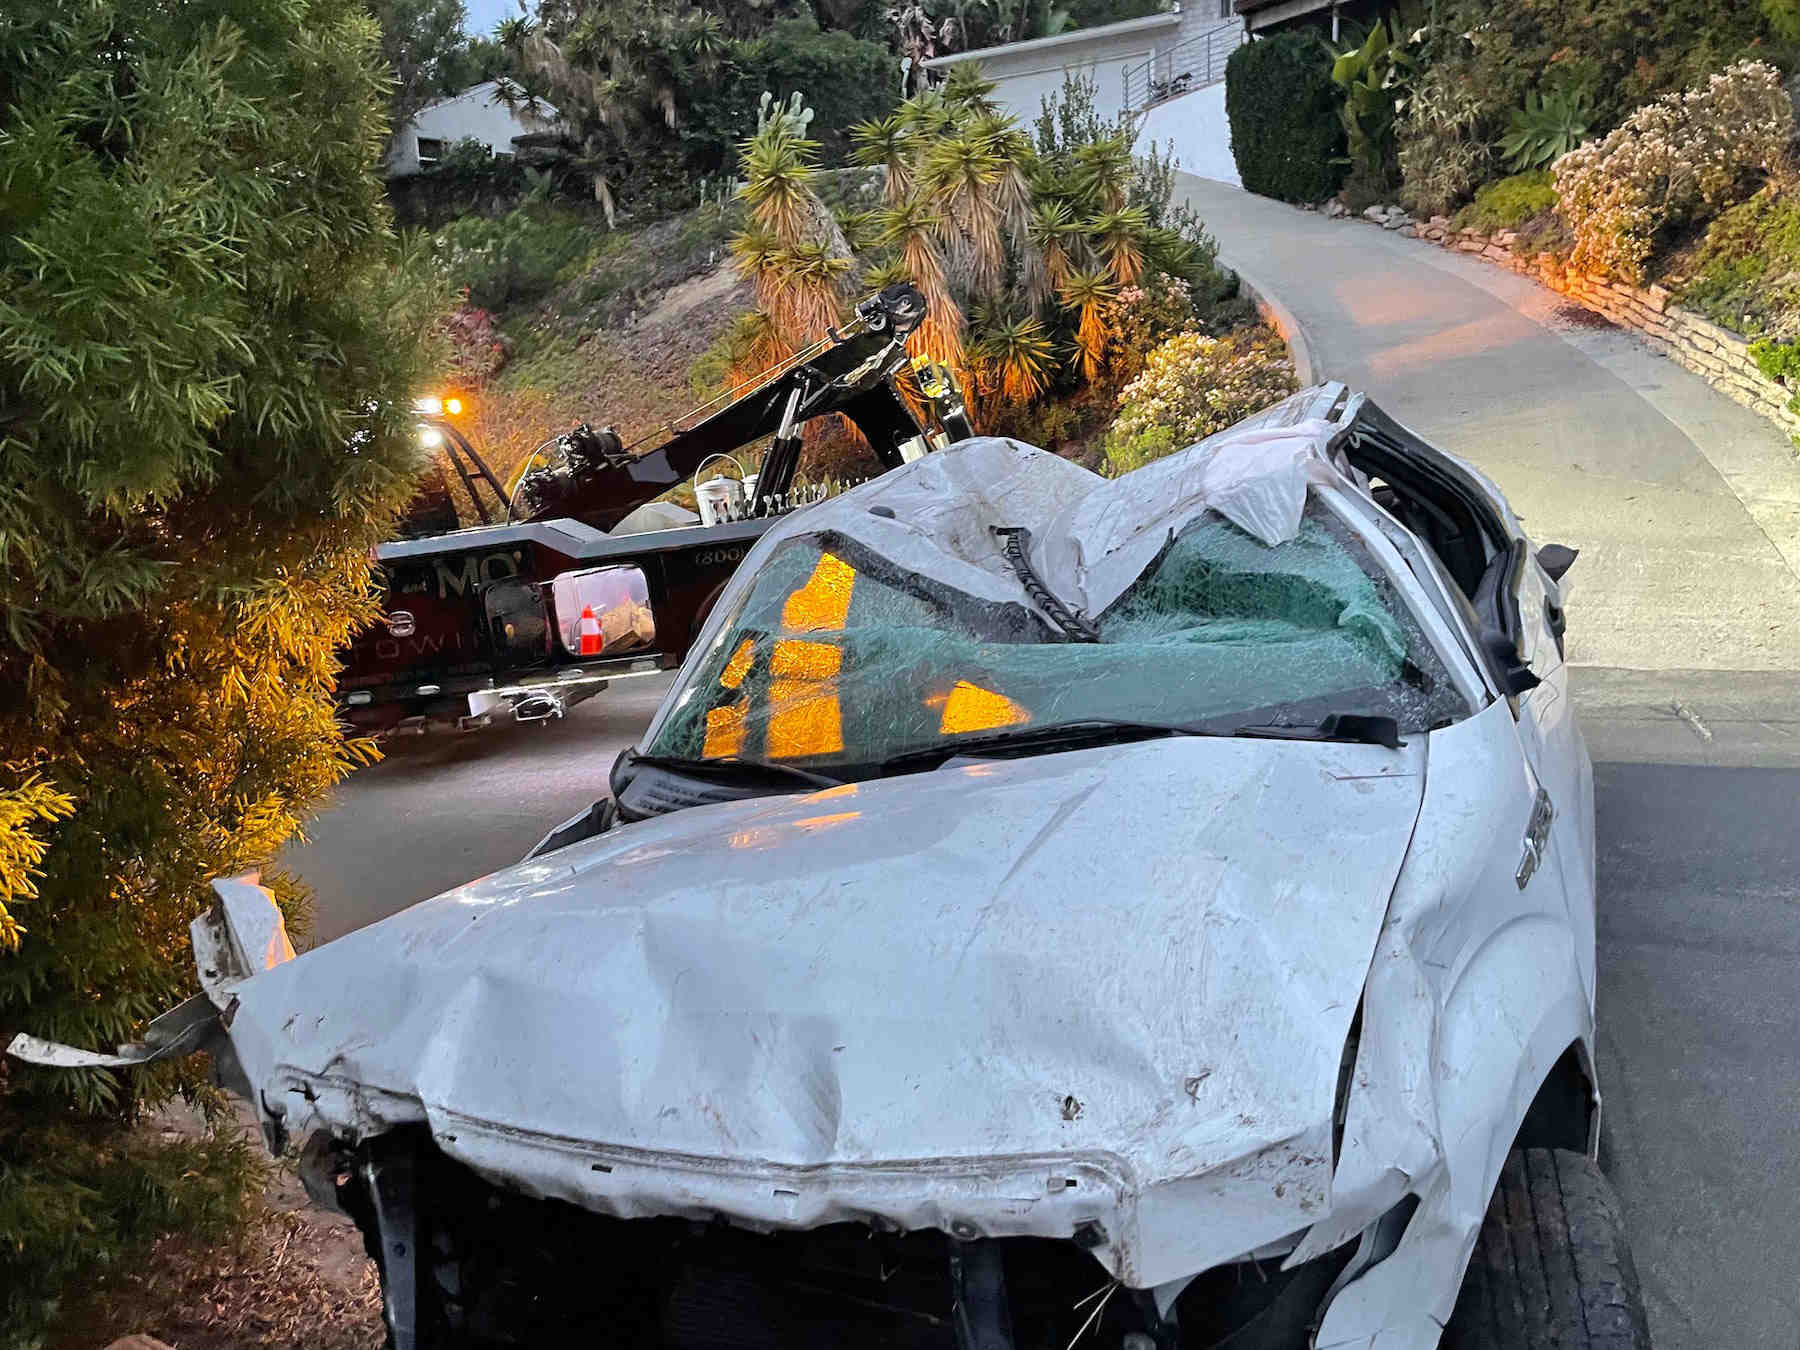 Several people were rushed to hospital after a chase and run ended in a car accident in Encinitas.